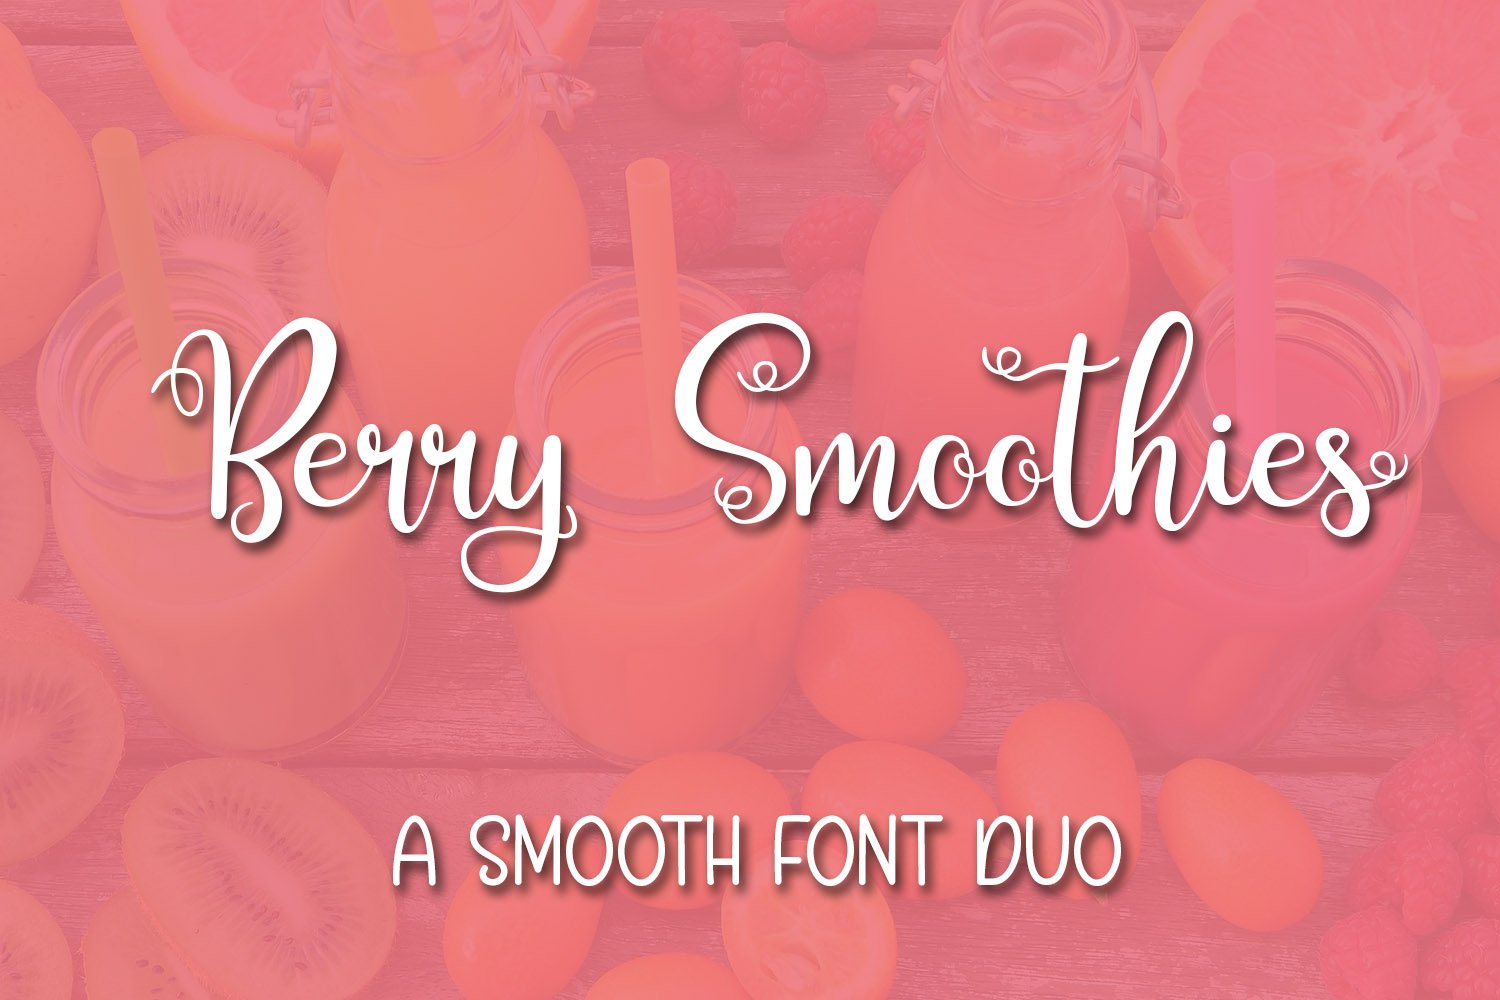 Berry Smoothies cover image.